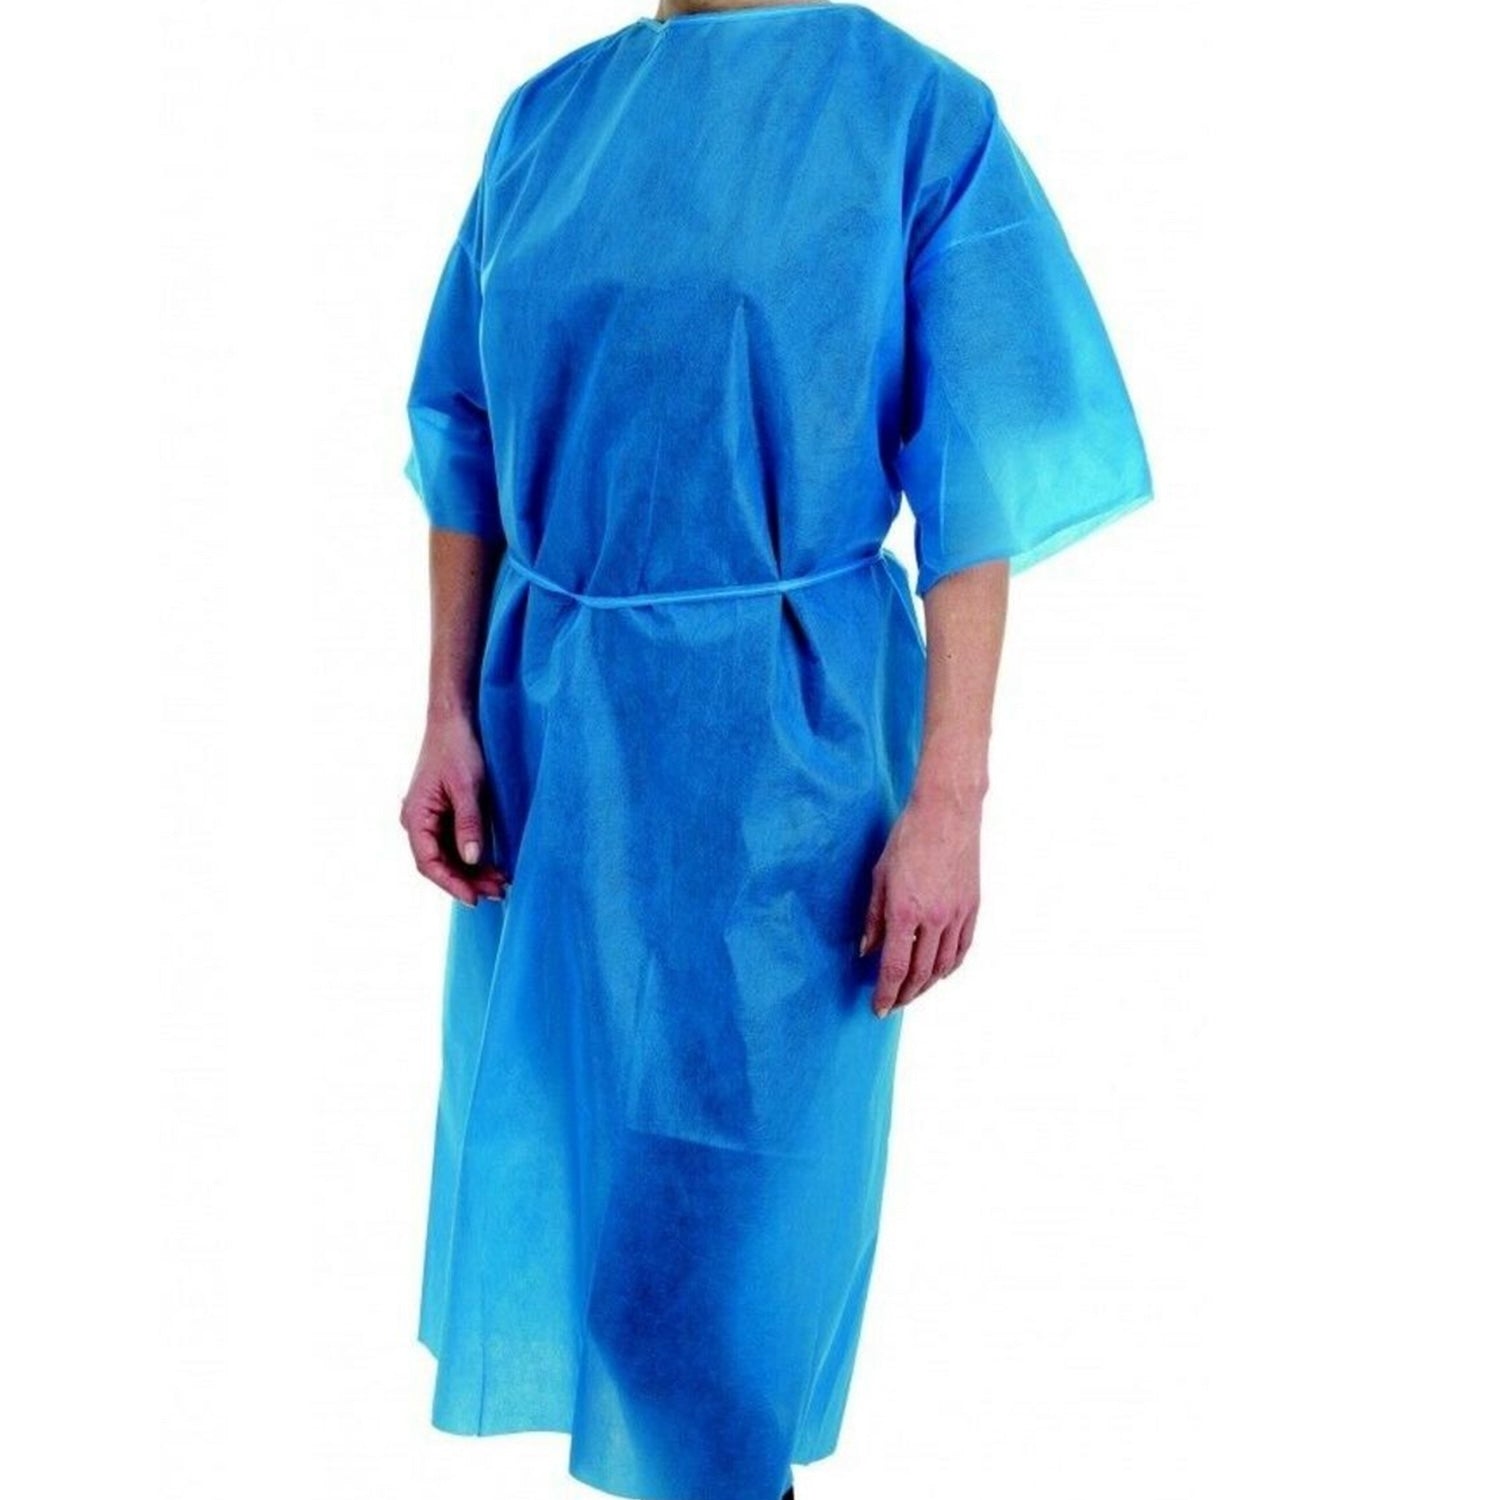 Premier Examination Gown | Short Sleeves | Blue | Pack of 50 (1)